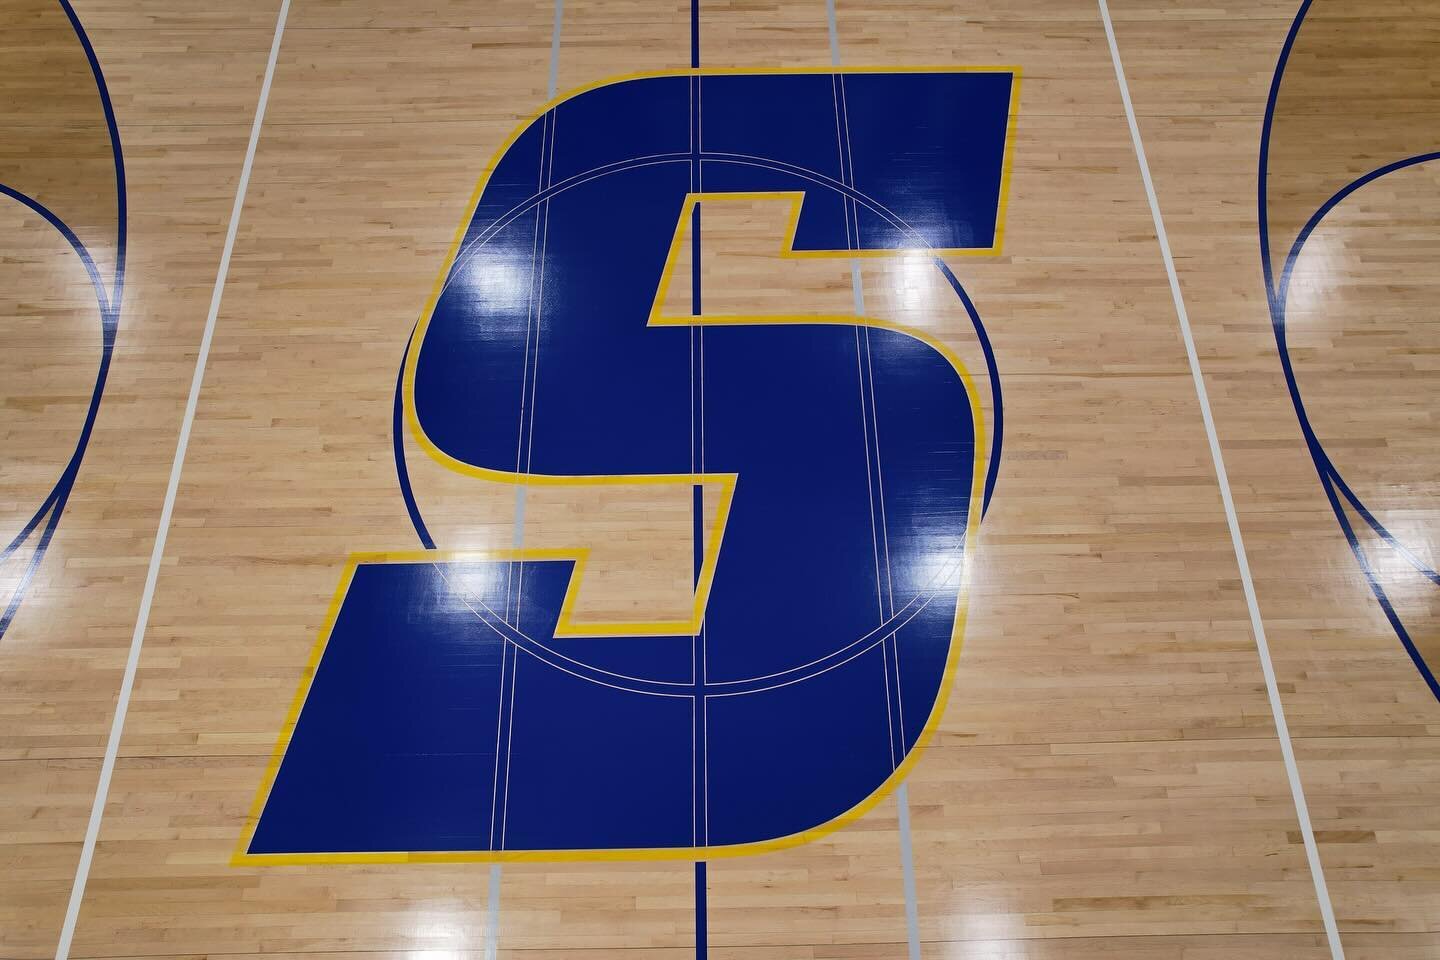 Bringing new life to the court where champions are made! 🏀✨ Salisbury Elk Lick High School&rsquo;s gymnasium is now shining bright, decked in our proud blue and yellow. Here&rsquo;s to many more victories and memories on this gleaming floor! Go Elks